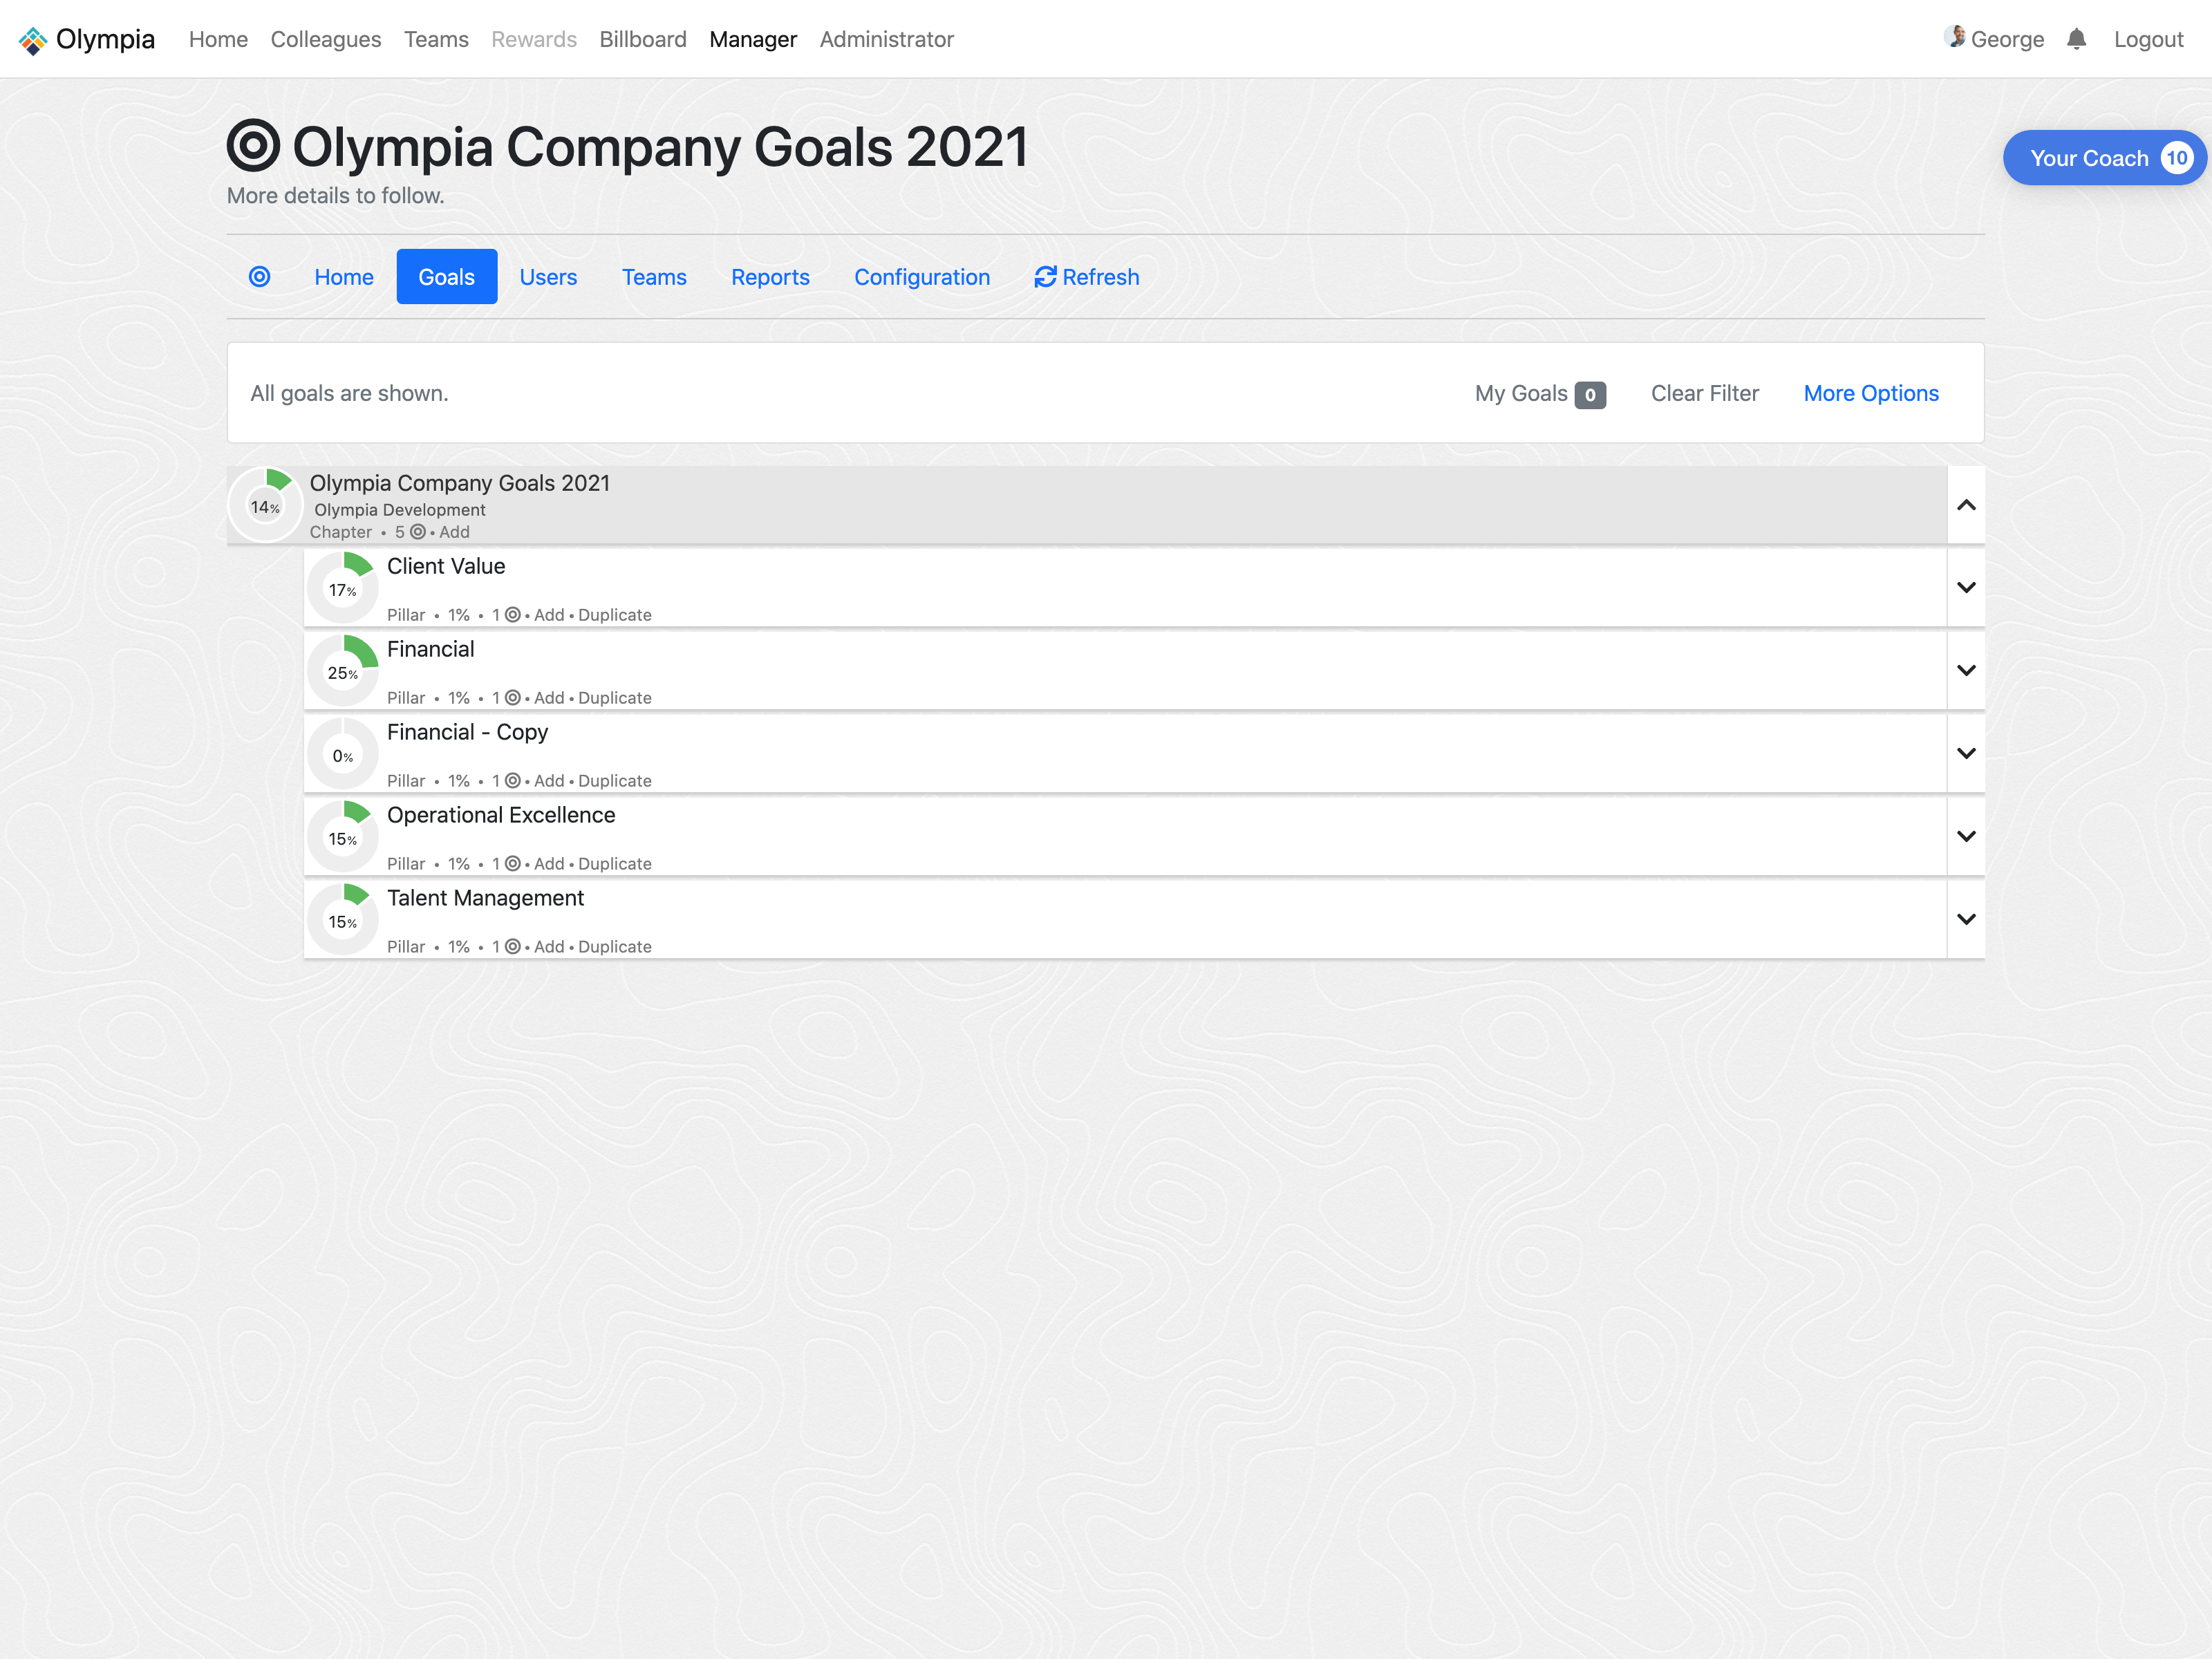 Olympia Engage Software - Goal view allows the employee to quickly align their personal goals with the company goals